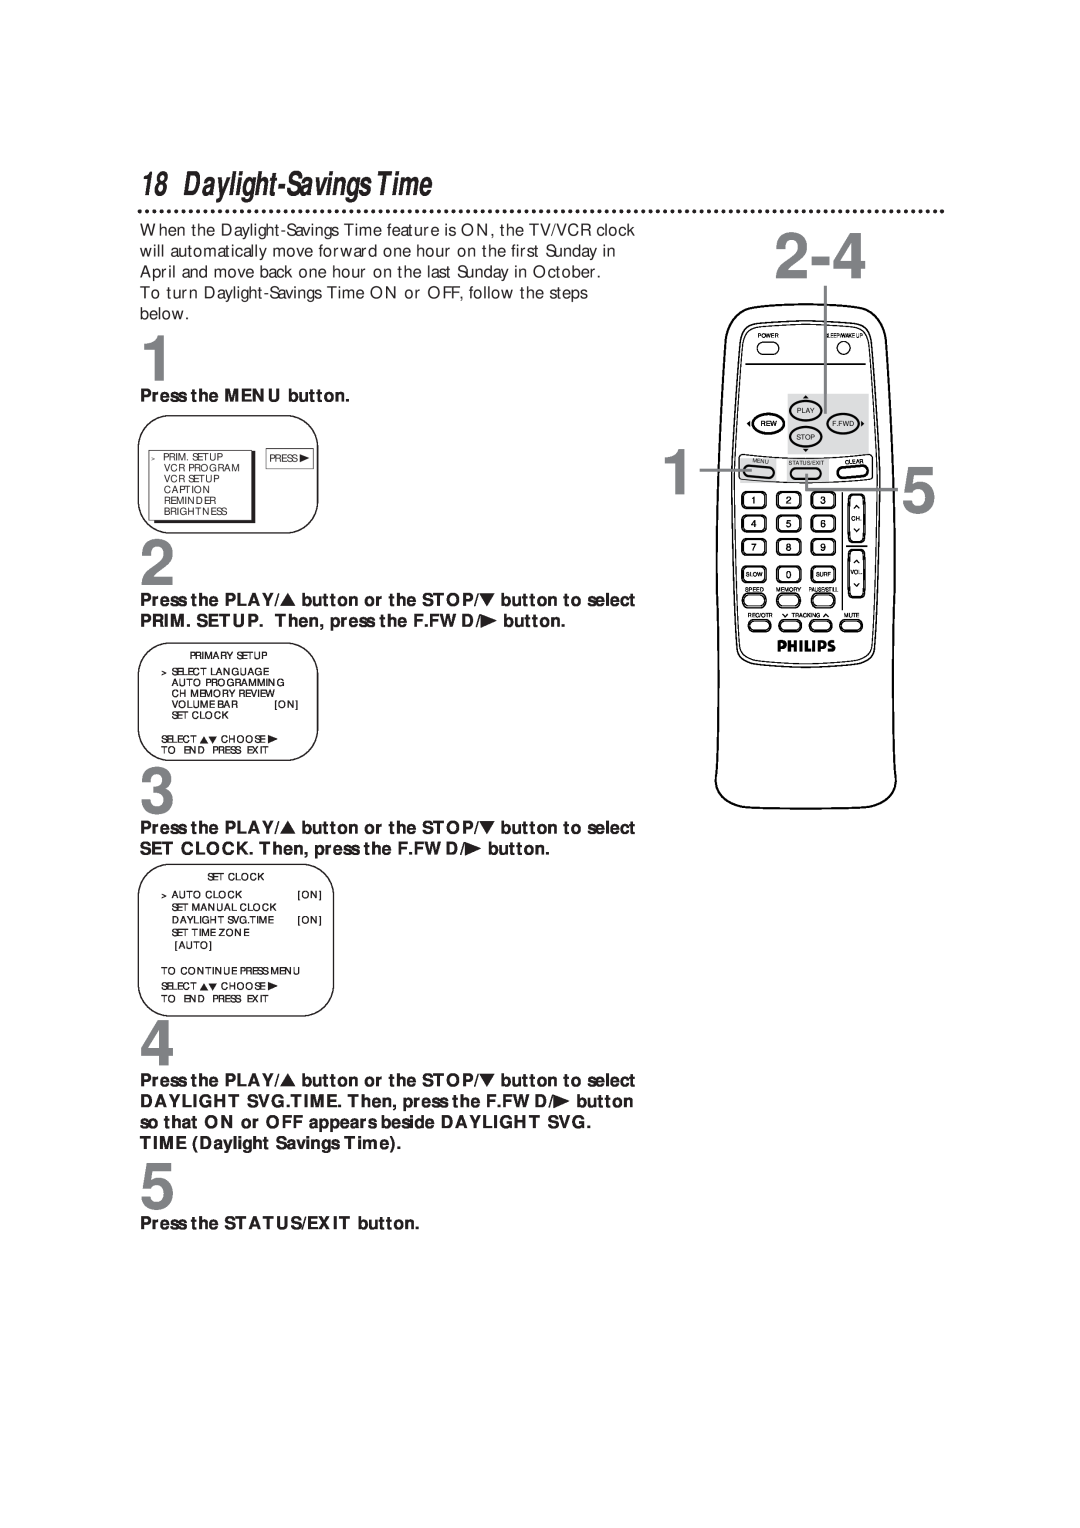 Magnavox CCB193AT owner manual To turn Daylight-Savings Time ON or OFF, follow the steps below 